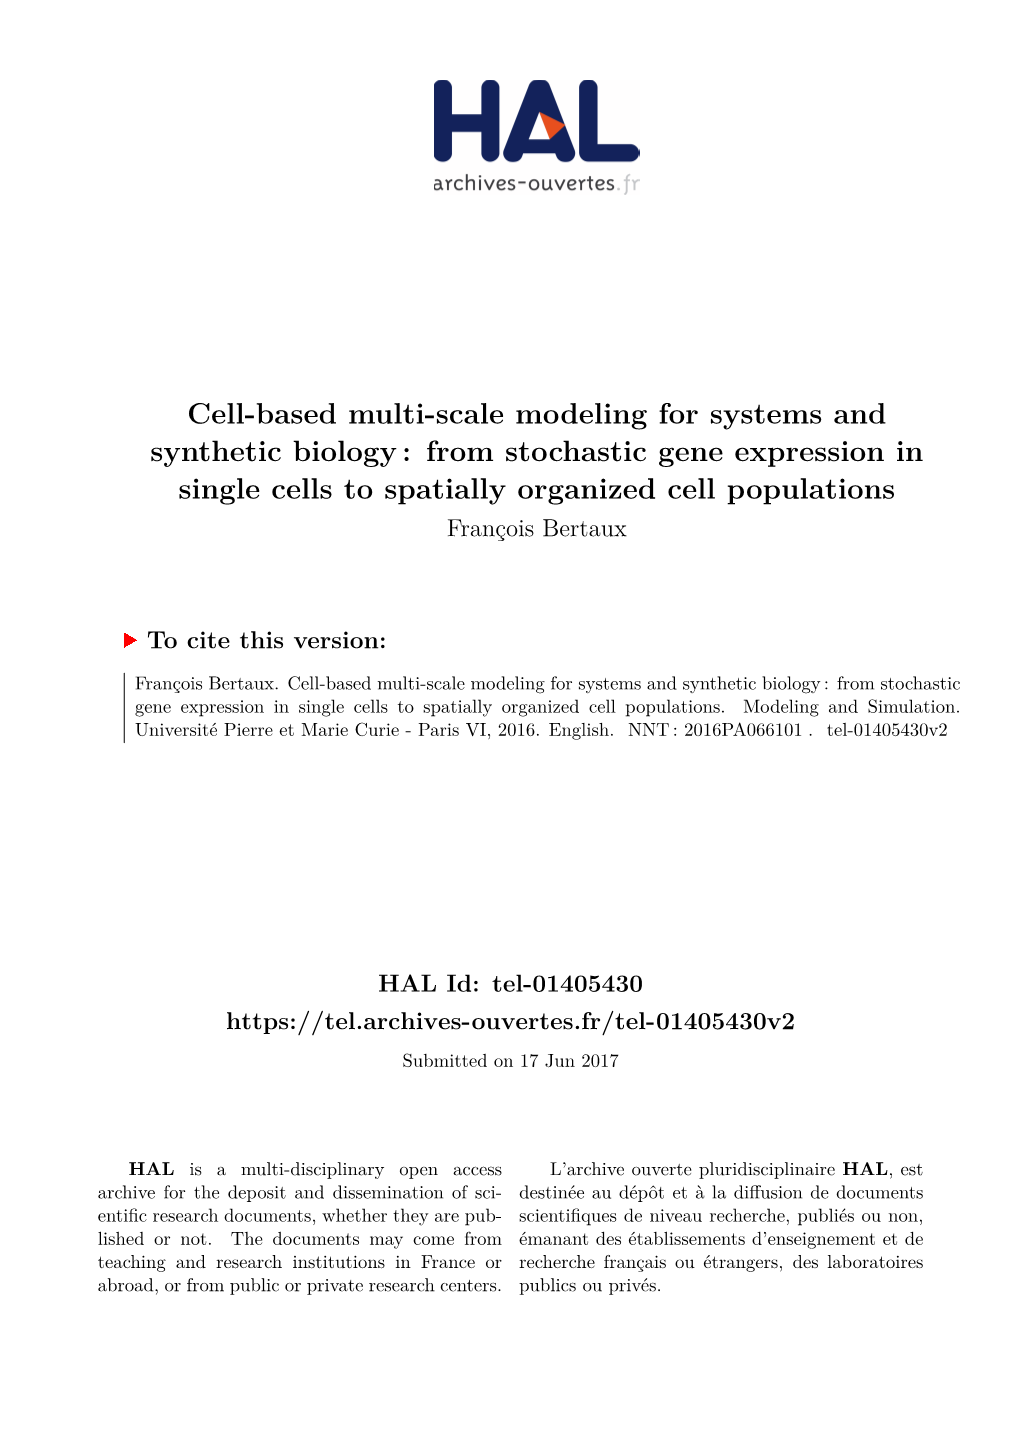 Cell-Based Multi-Scale Modeling for Systems and Synthetic Biology: from Stochastic Gene Expression in Single Cells to Spatially Organized Cell Populations